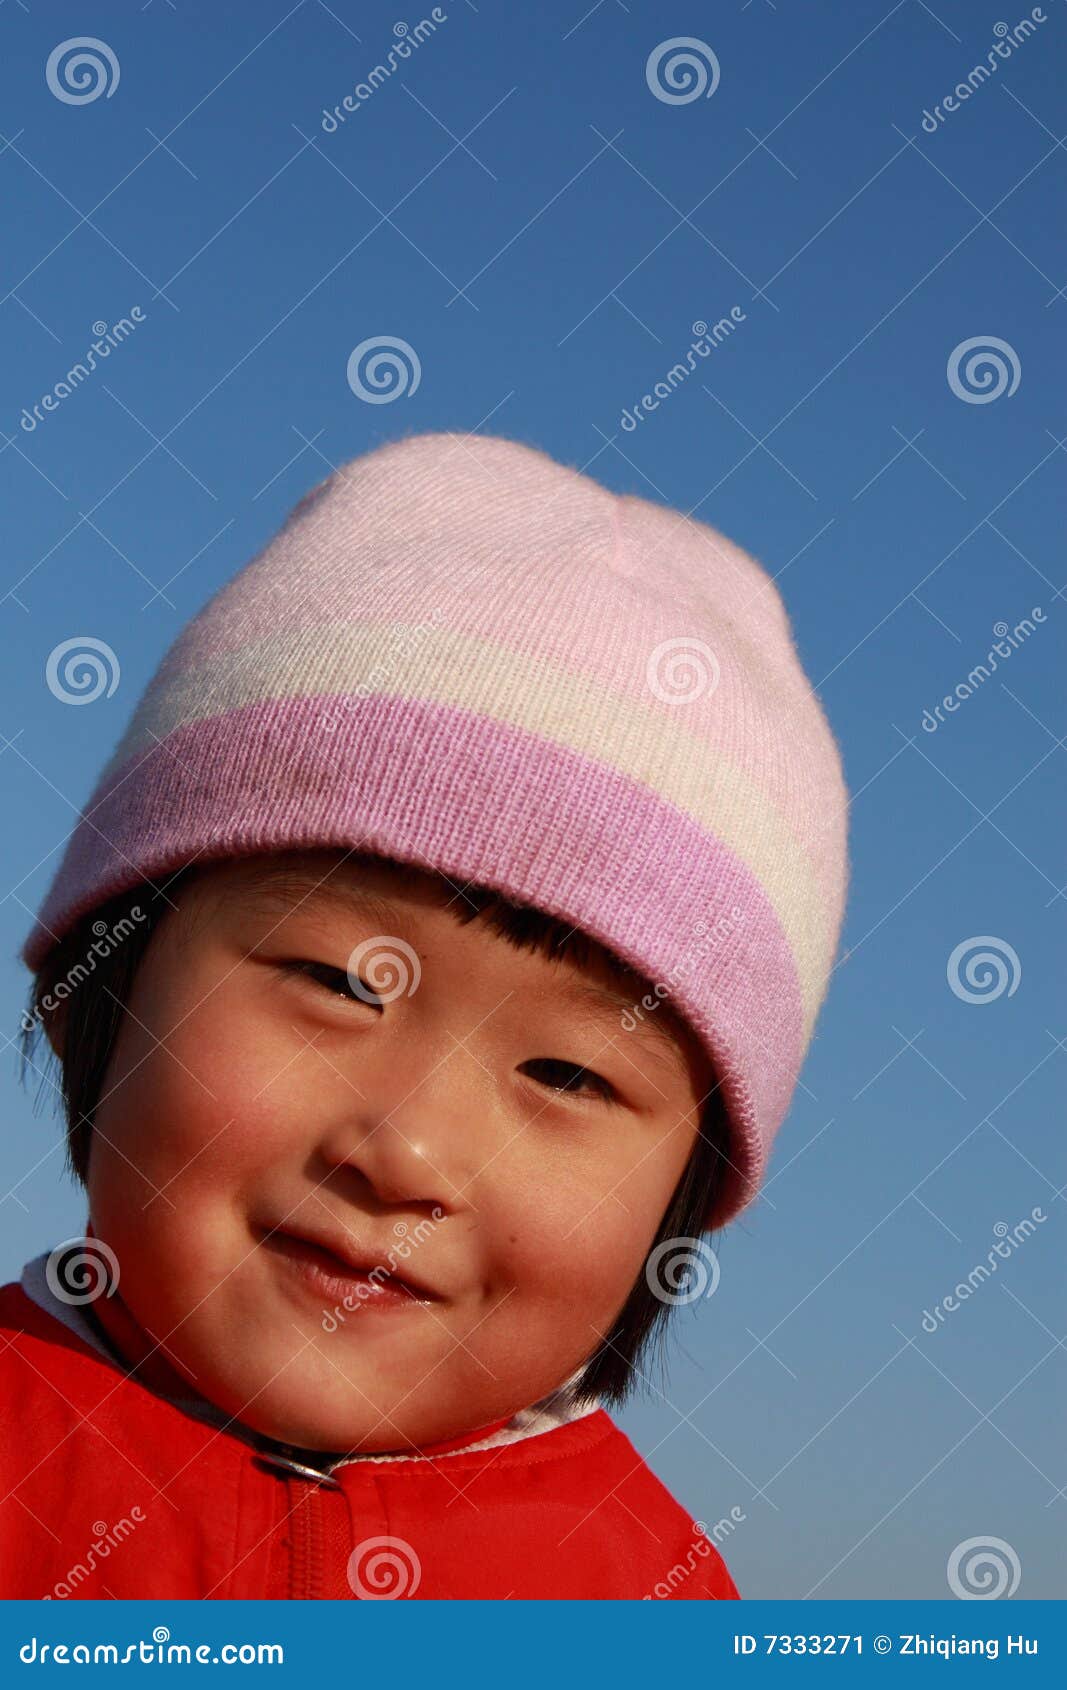 Chinese cute girl winter. Chinese cute girl portrait time winter